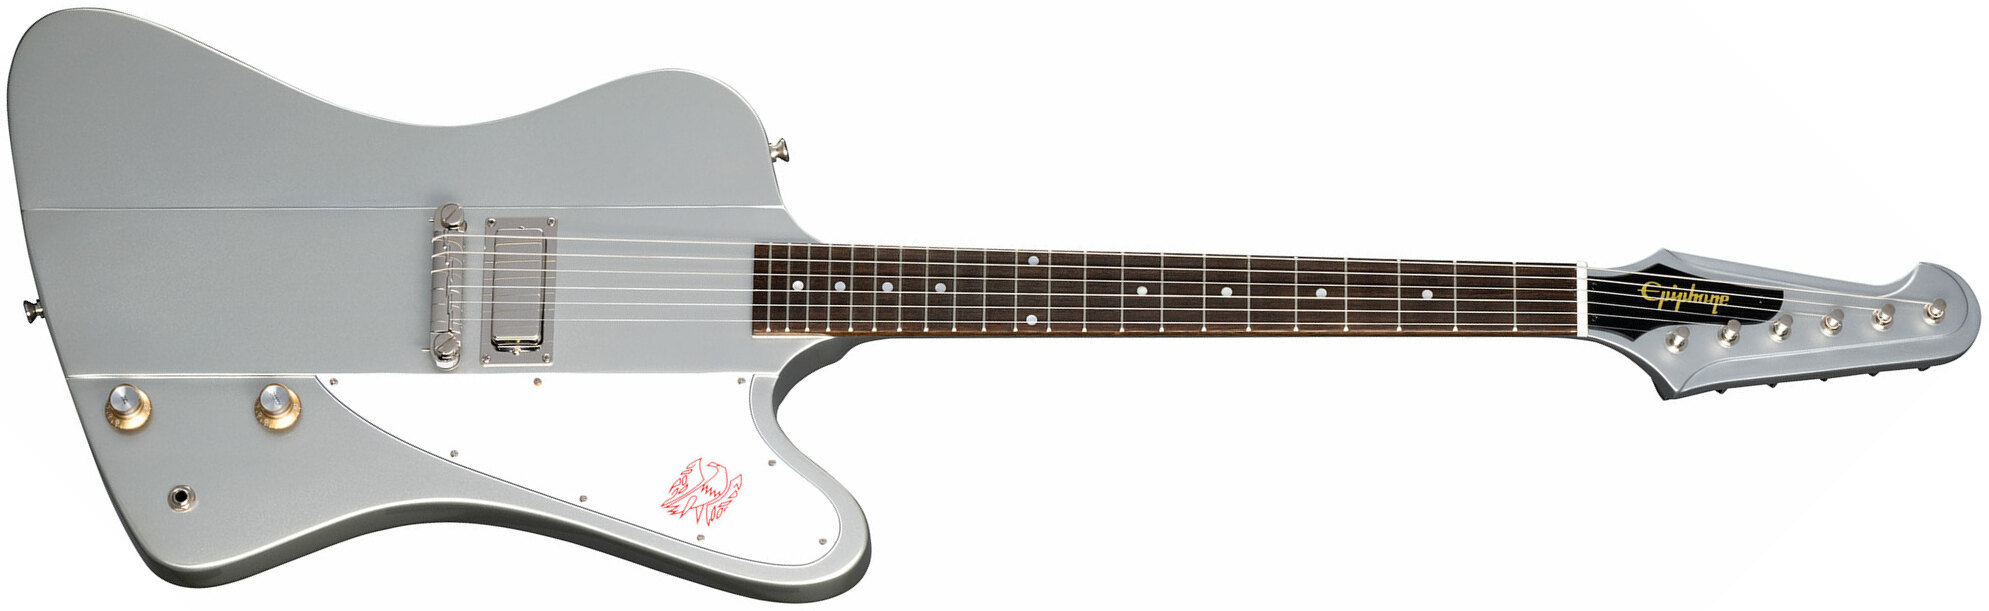 Epiphone Firebird I 1963 Inspired By Gibson Custom 1mh Ht Lau - Silver Mist - Guitare Électrique RÉtro Rock - Main picture